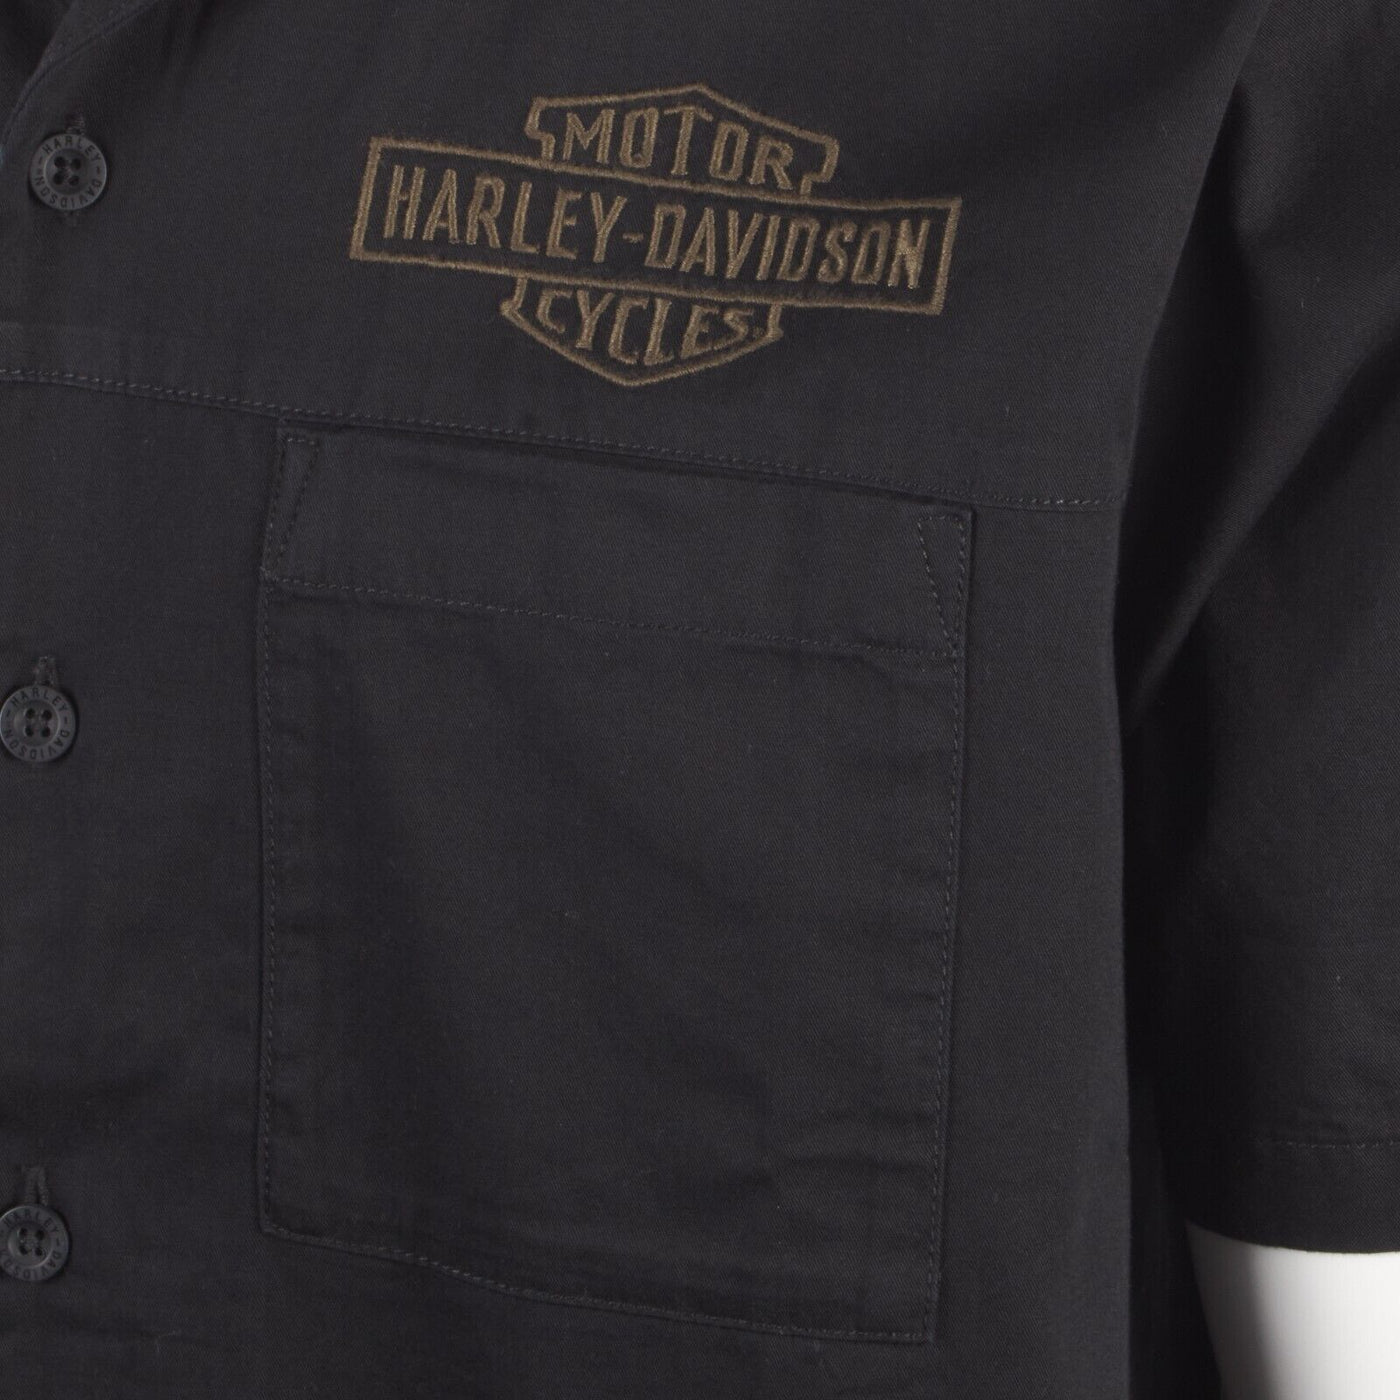 Harley-Davidson Men's Black Beauty Wrench Crew S/S Woven Shirt (S46A)